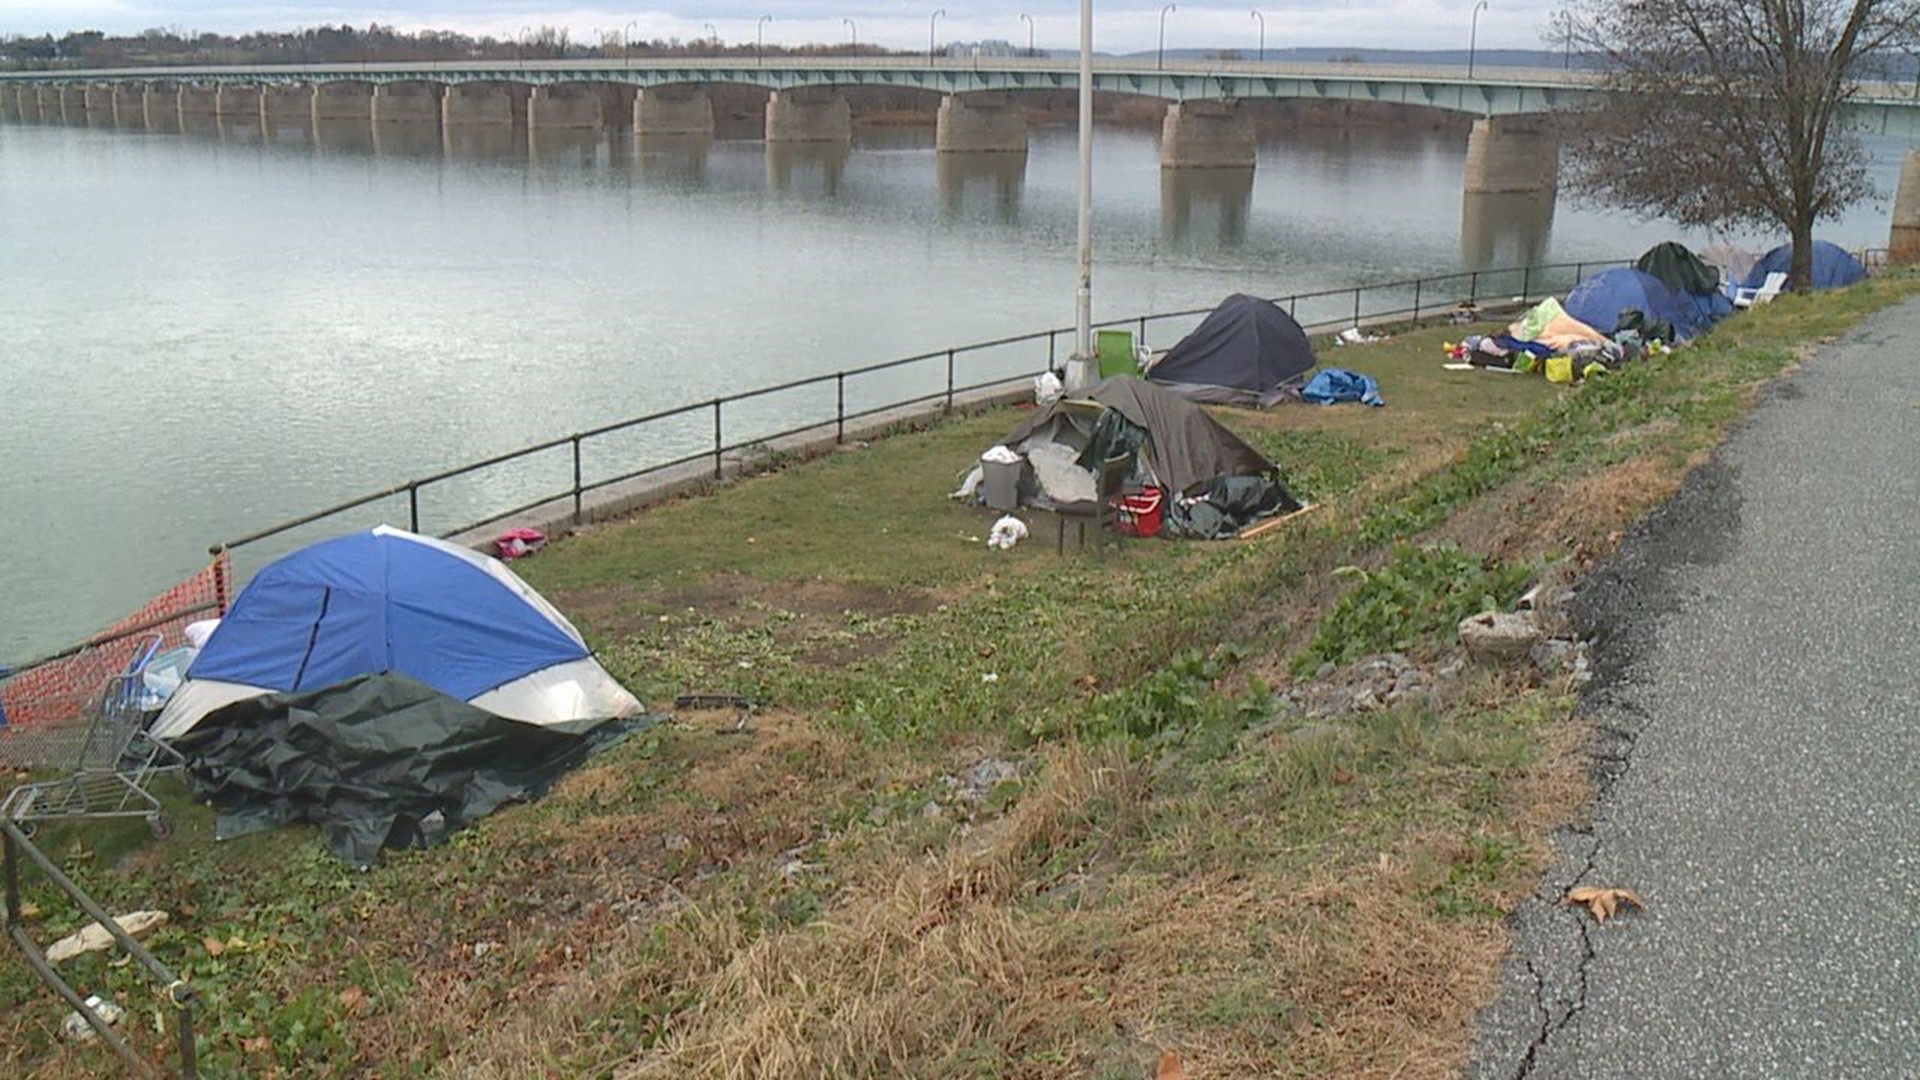 Representatives for the City of Harrisburg say concerns are growing about sanitation, as the encampment gets bigger.